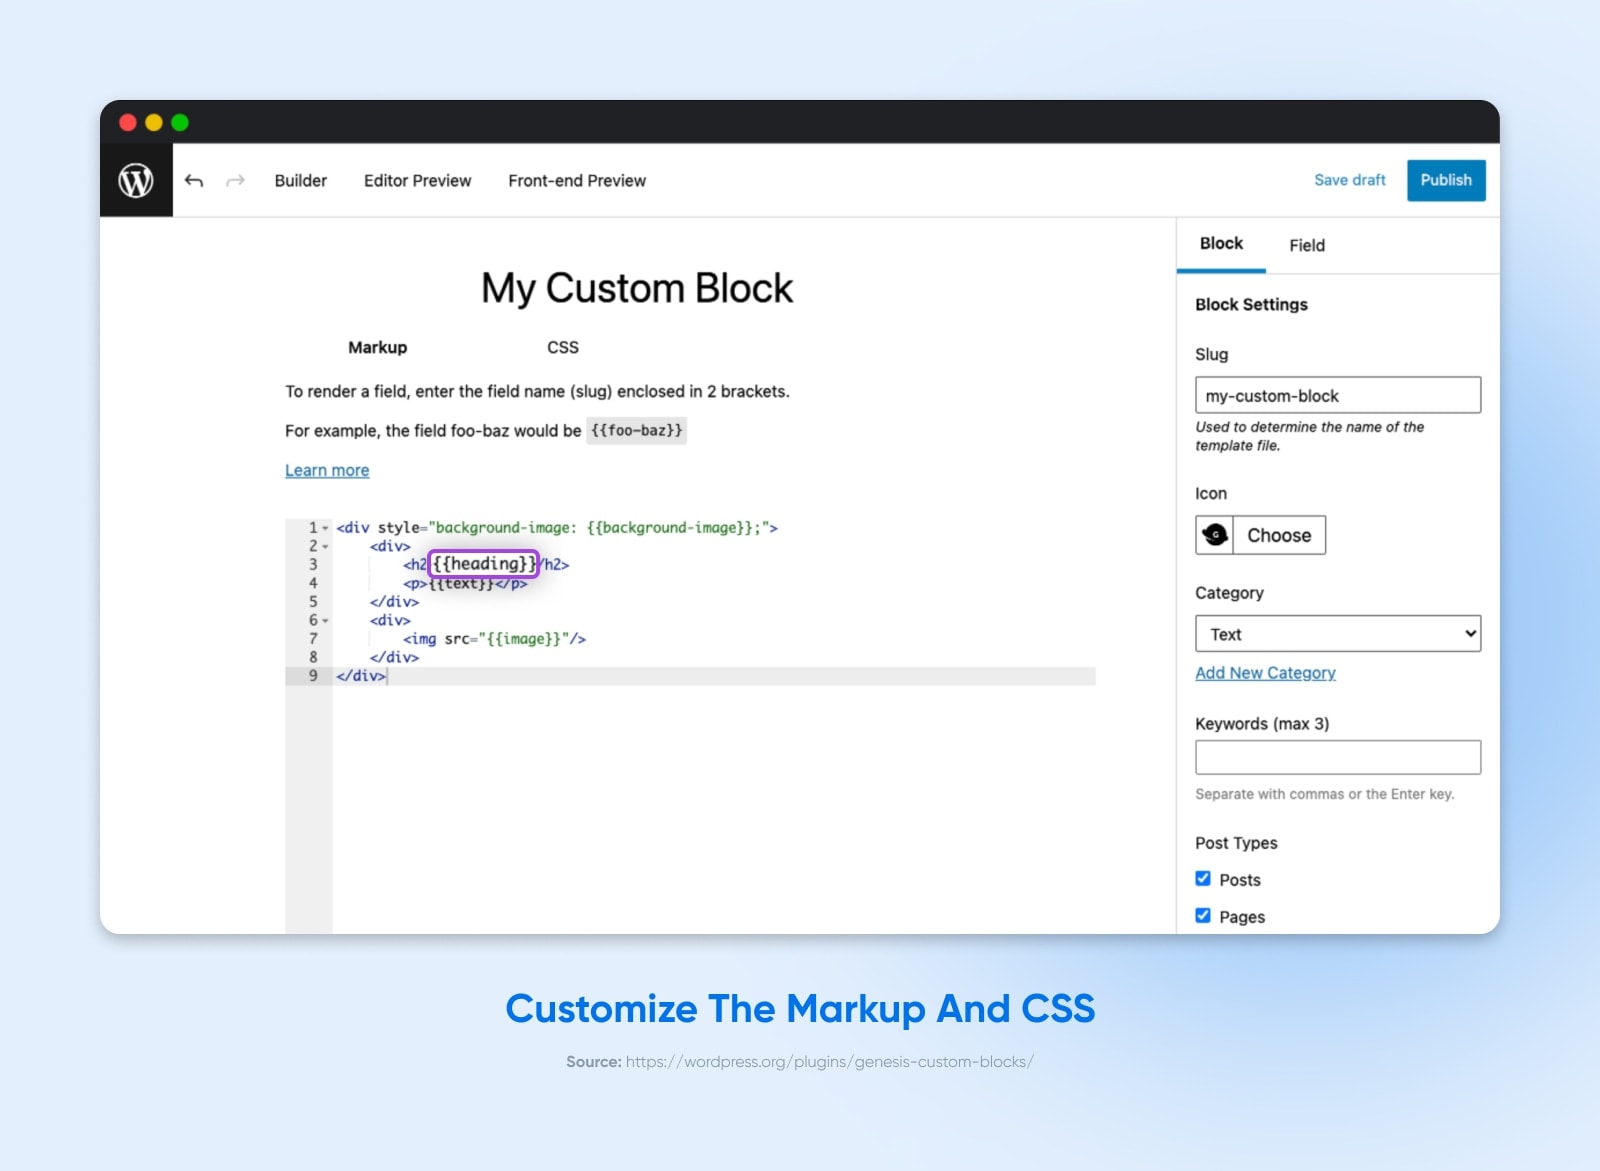 Customize the Markup and CSS